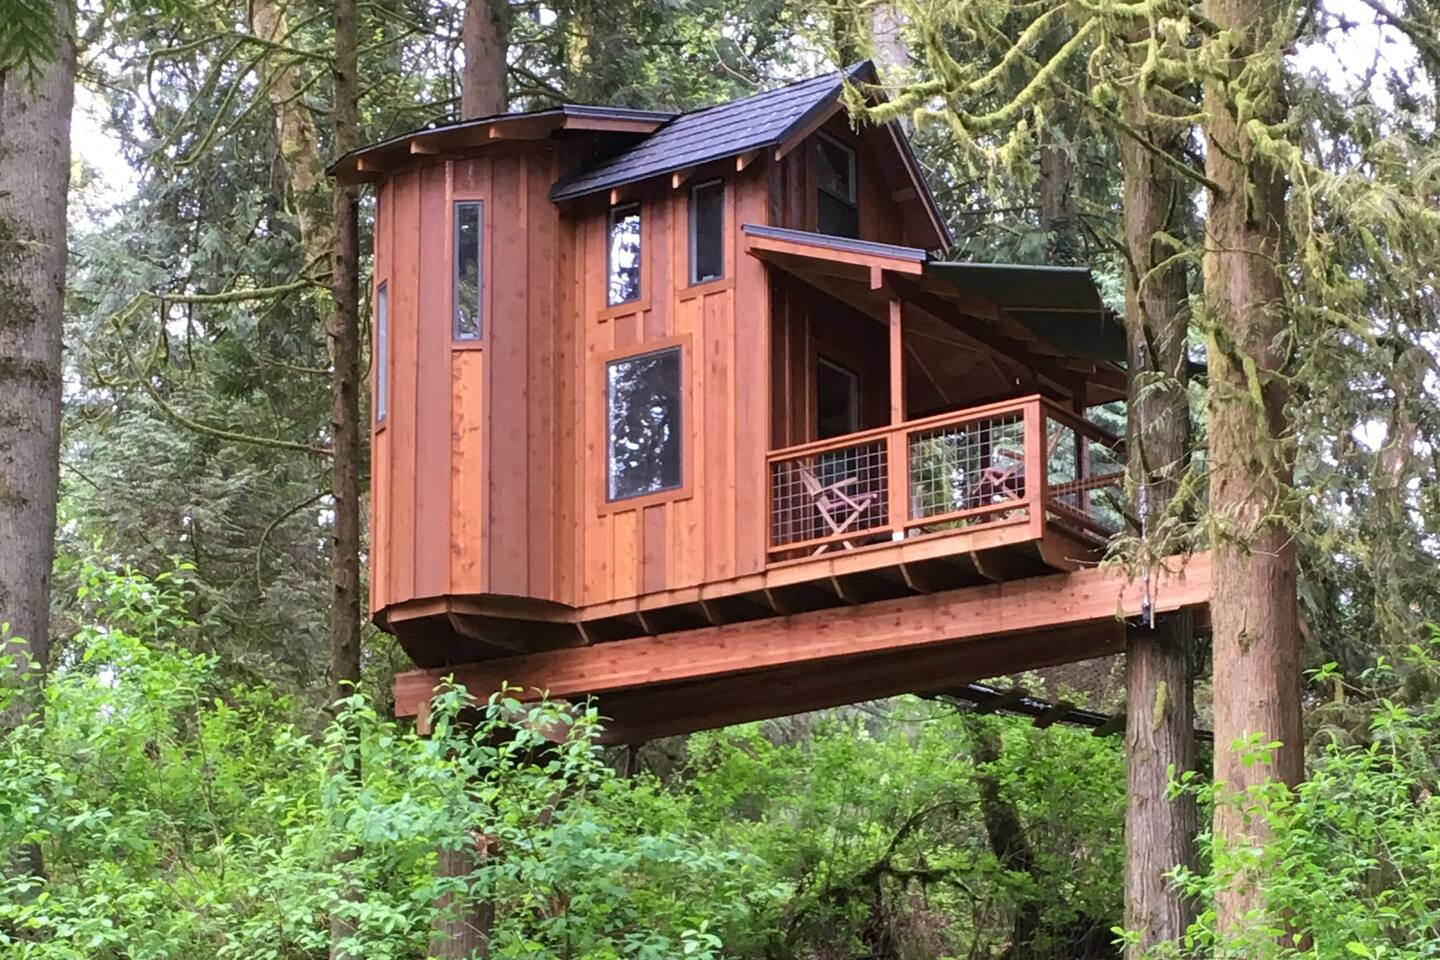 Tree House in the City - Urban Couples Getaway by Pete Nelson in Quiet Neighborhood